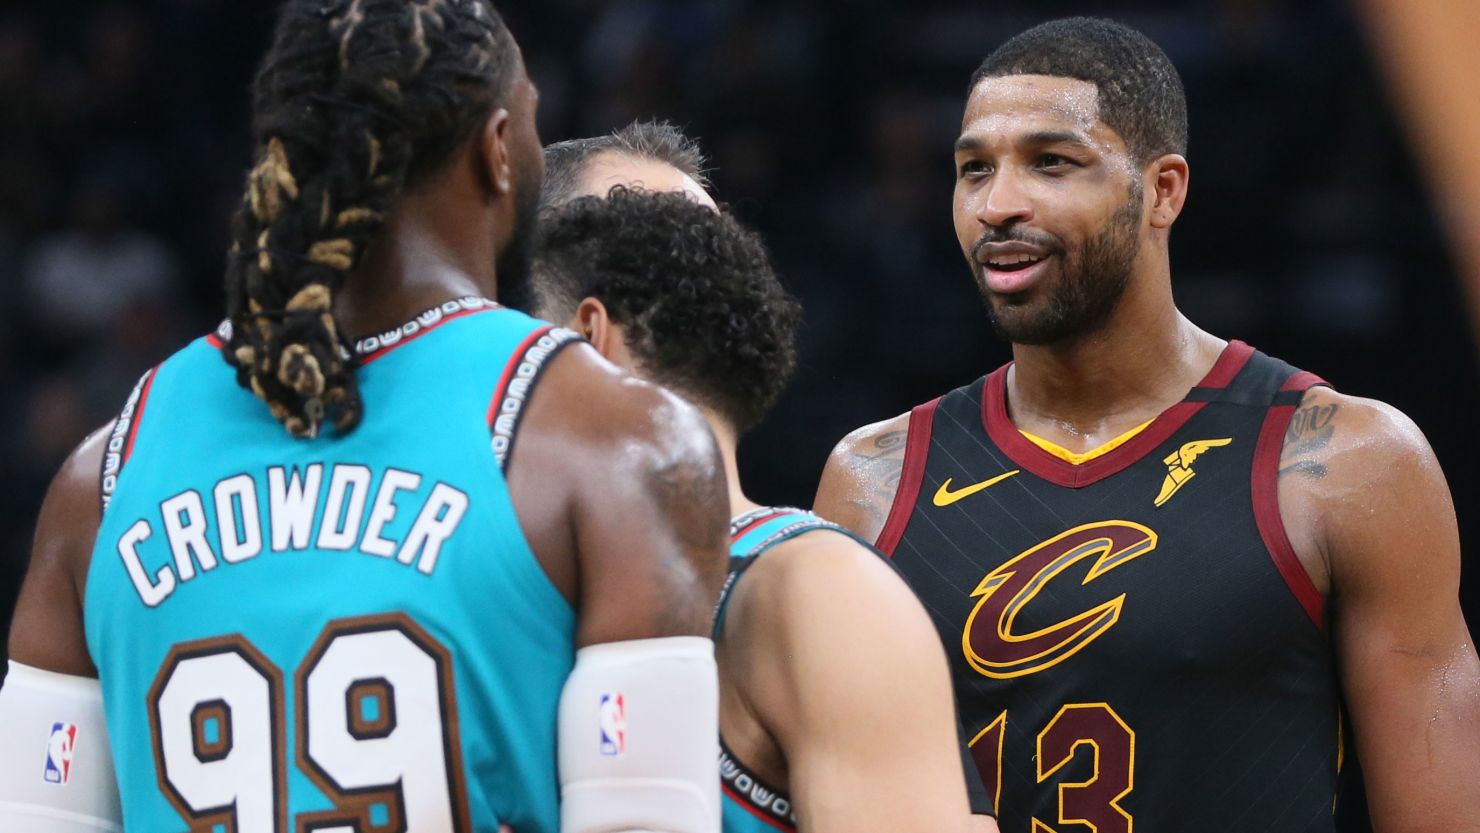 Cavaliers forward Tristan Thompson is called for a technical foul for smacking Memphis Grizzlies forward Jae Crowder's butt during the Cavaliers-Grizzlies game on Friday, January 17, 2020.